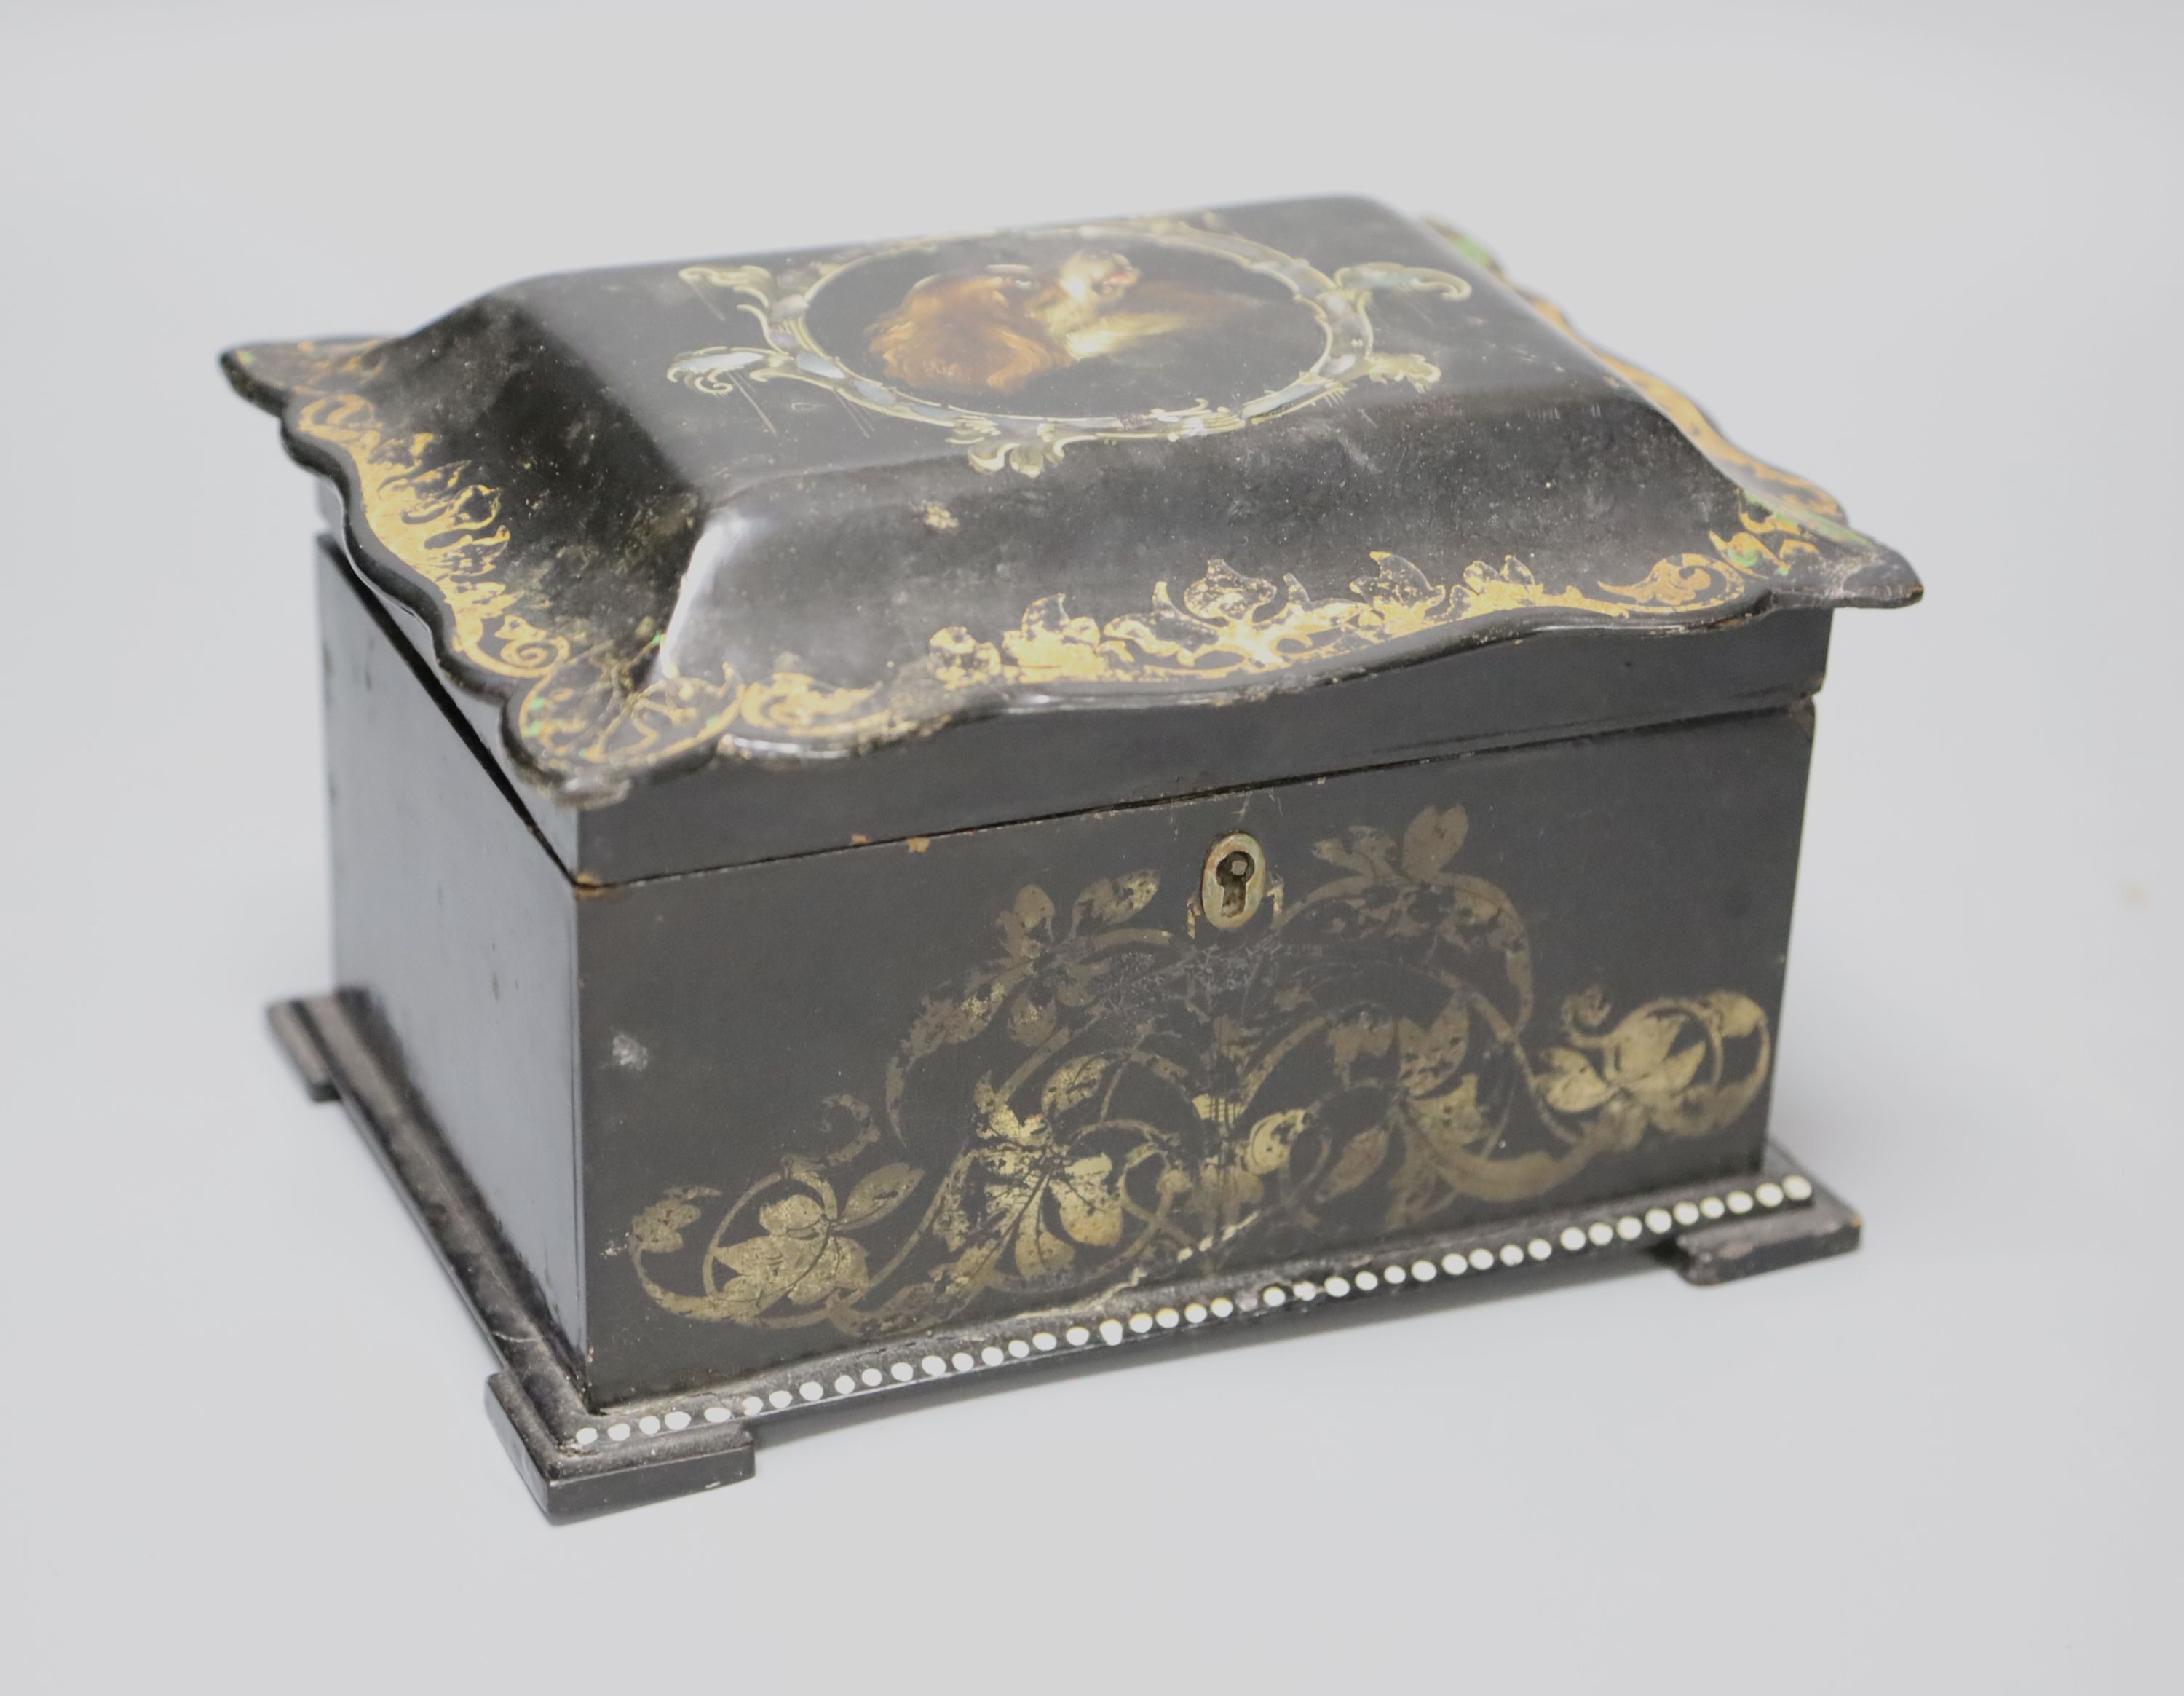 A 19th century black papier mache tea caddy cover painted with a central cartouche of a dog's head